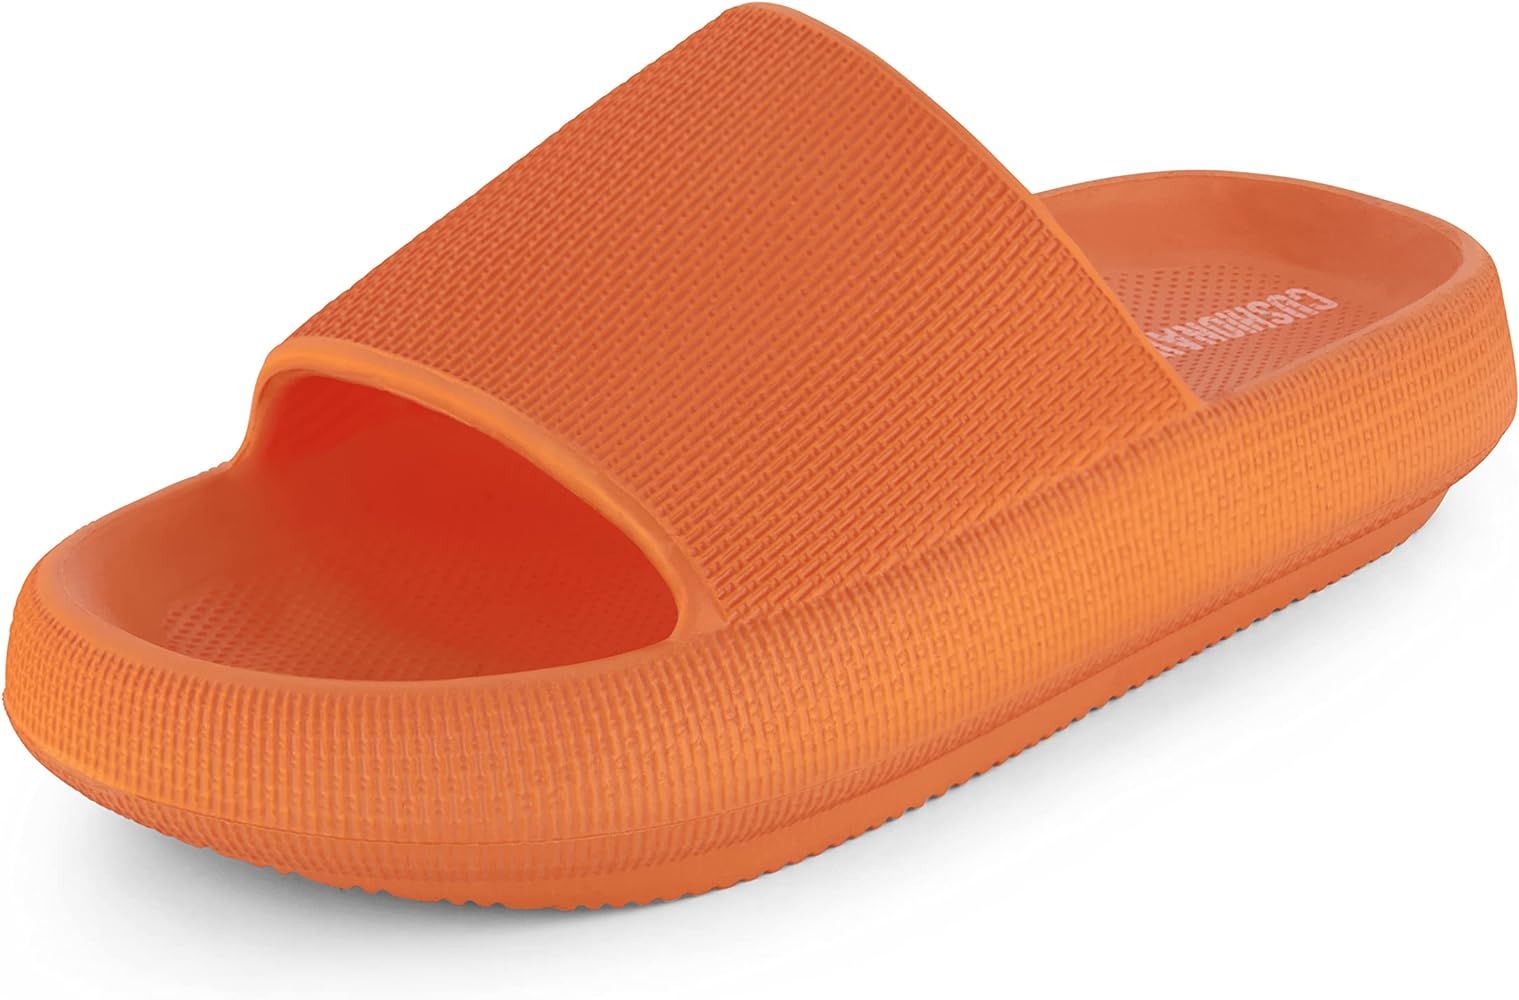 Cushionaire Women's Feather recovery slide sandals with +Comfort | Amazon (US)